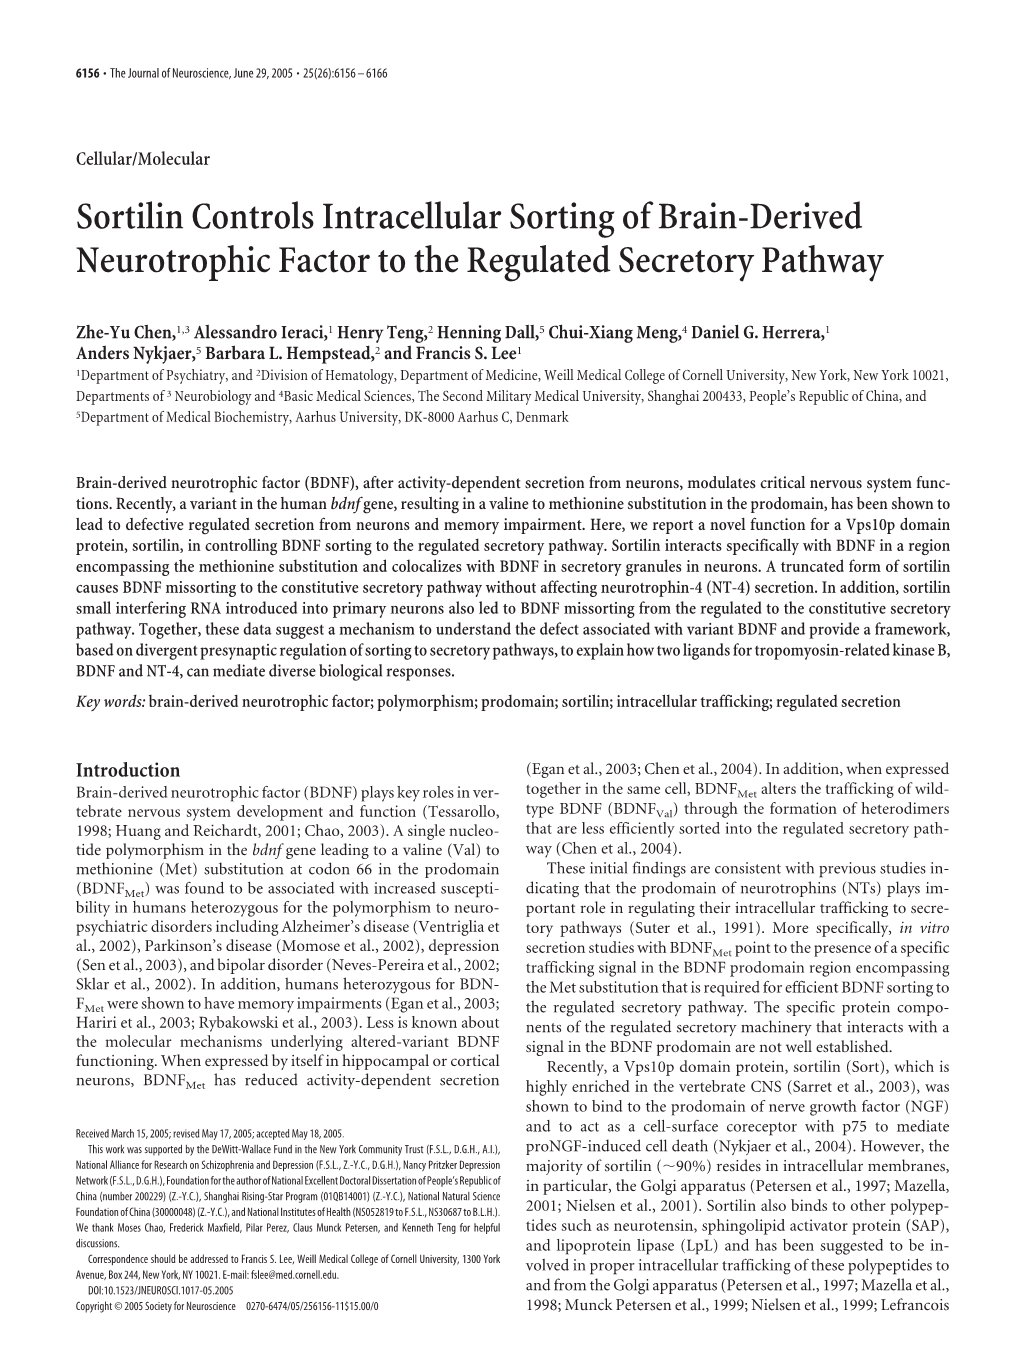 Sortilin Controls Intracellular Sorting of Brain-Derived Neurotrophic Factor to the Regulated Secretory Pathway